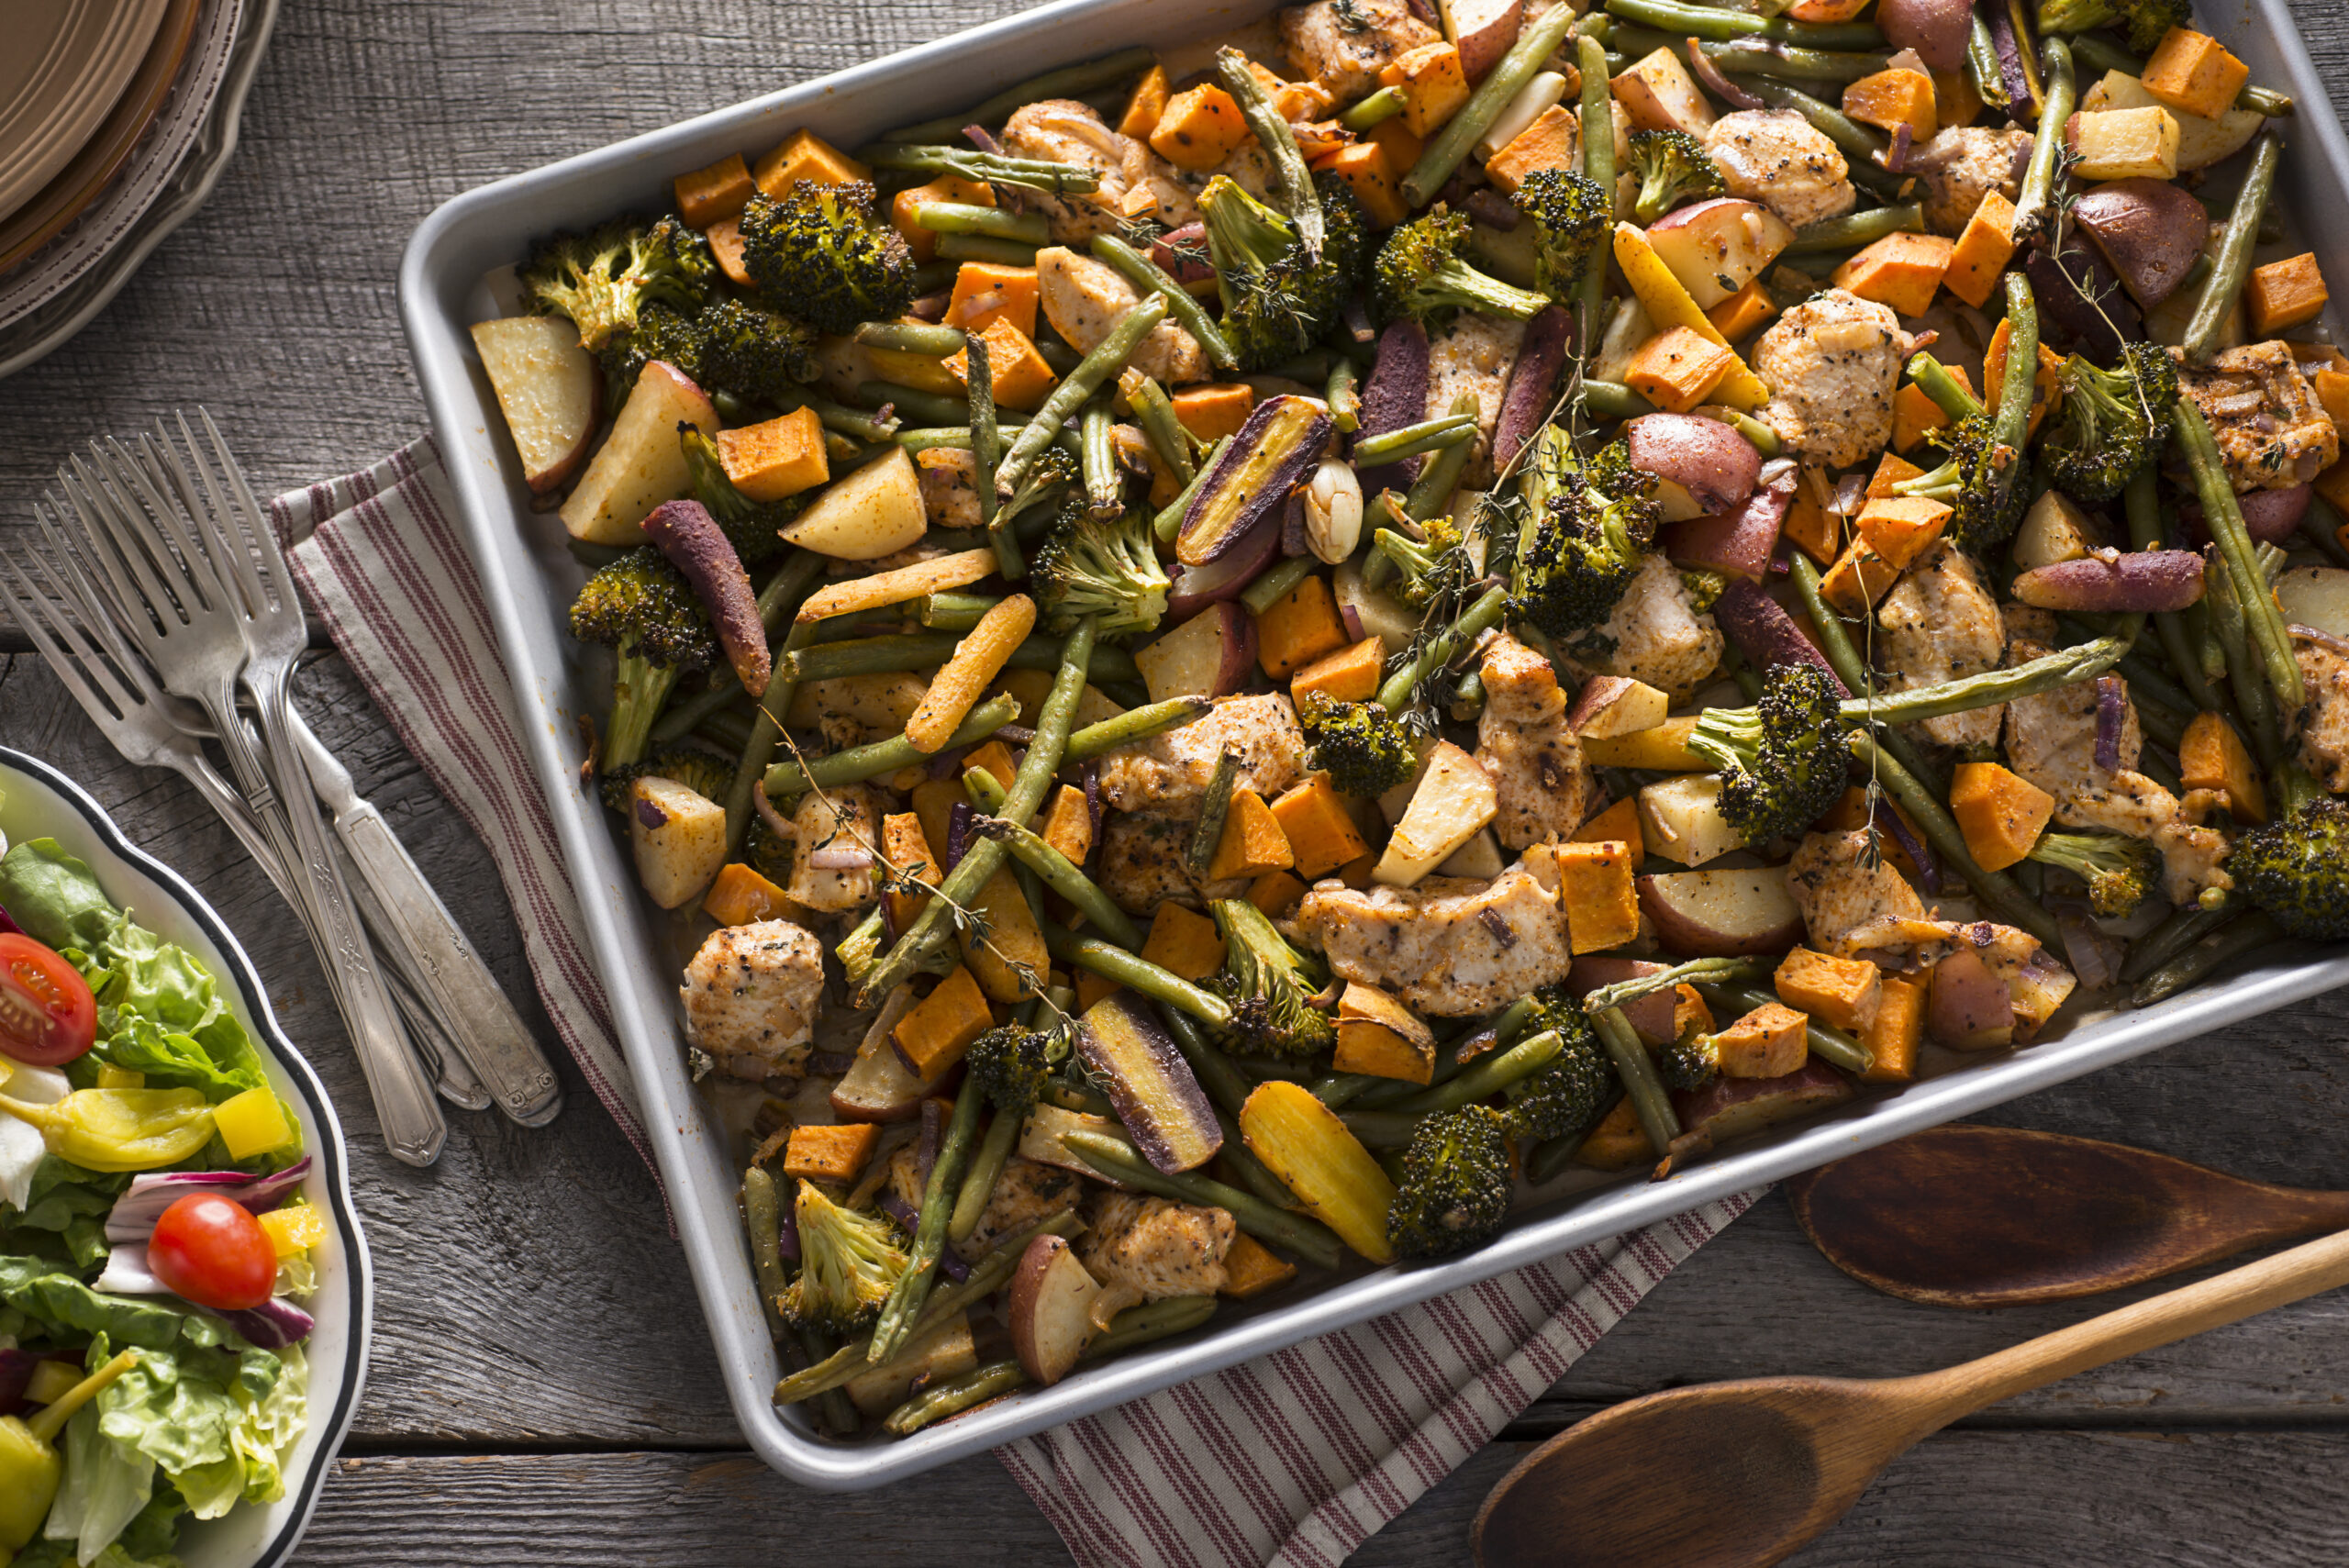 Chicken Sheet Pan Dinner with Broccoli, Red Potatoes, Green Beans, Sweet Potatoes, Rainbow Carrots, Onion and Thyme.